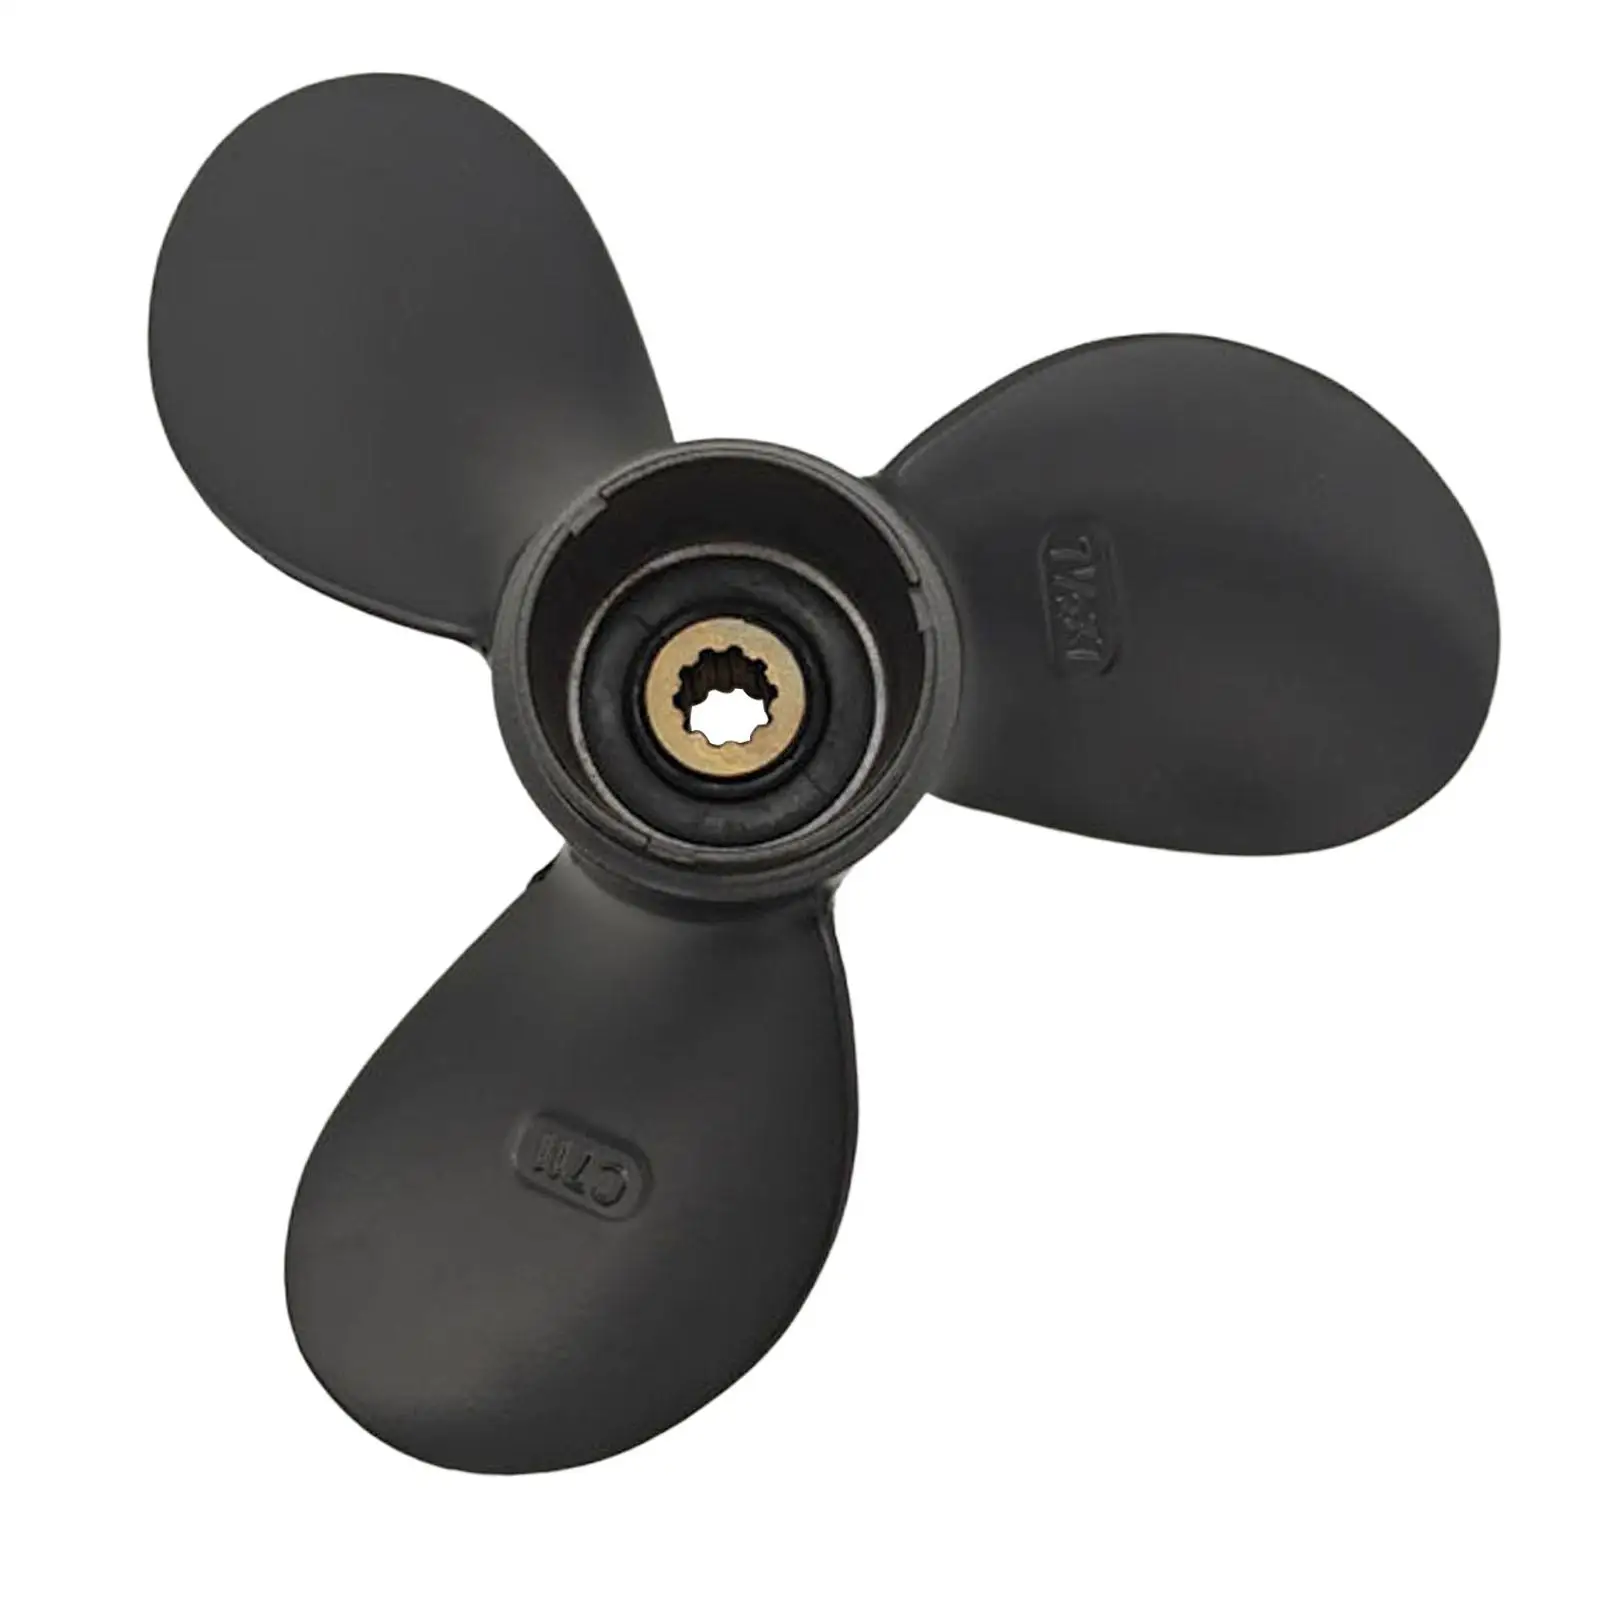 Propeller 7 1/2x7 58111-98651-019 Plastic Accessory Replaces Black  Color Easily